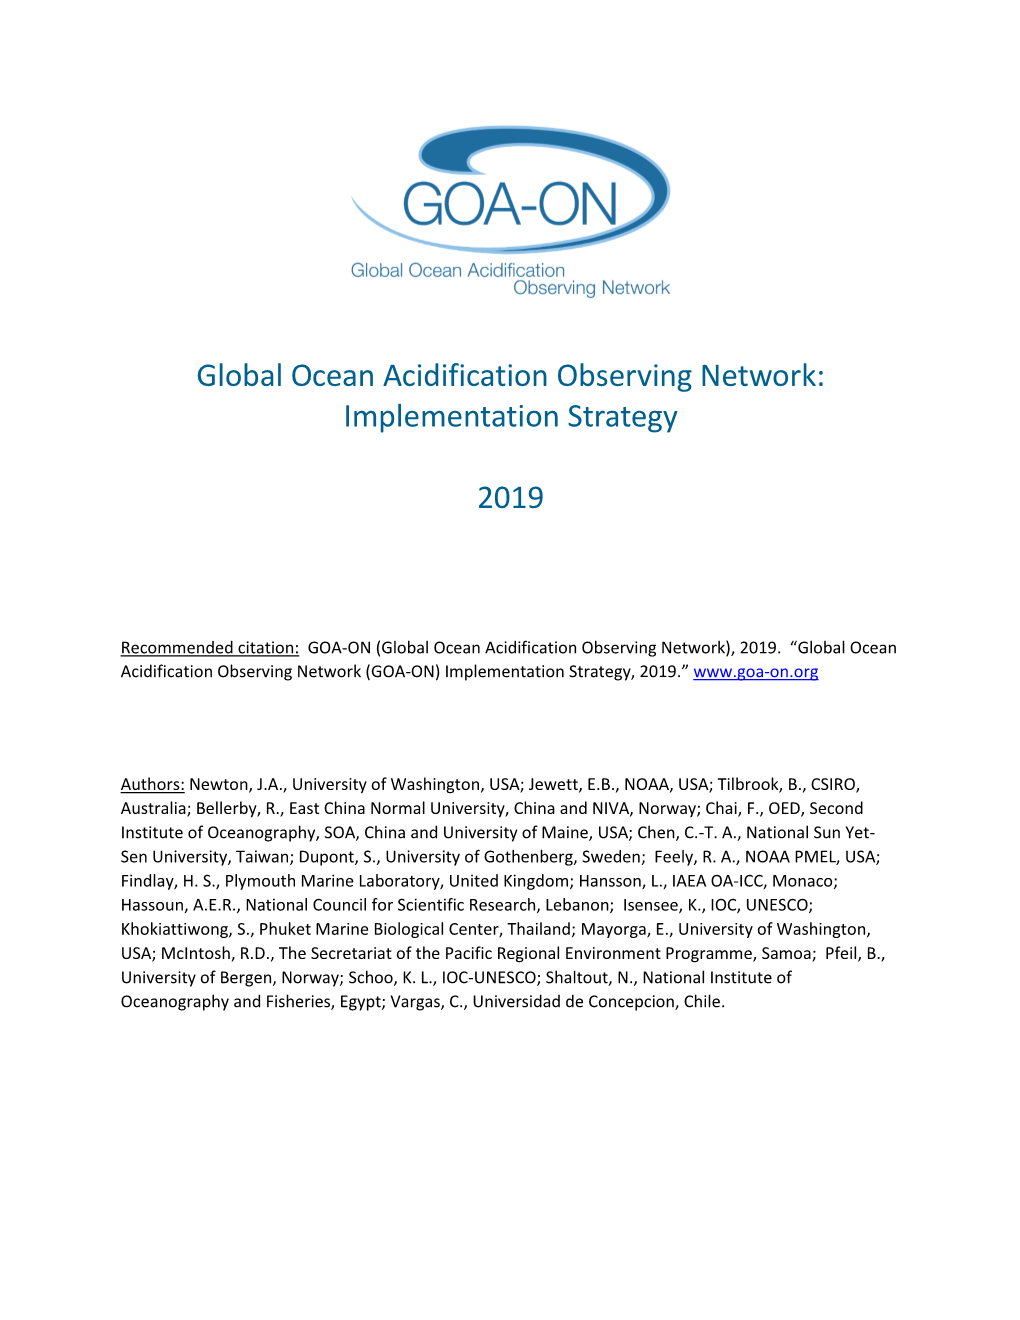 GOA-ON Implementation Strategy GOA-ON Executive Council Approval Release Date 15, April, 2019 Community Input Resolution Release Date 30 November, 2019